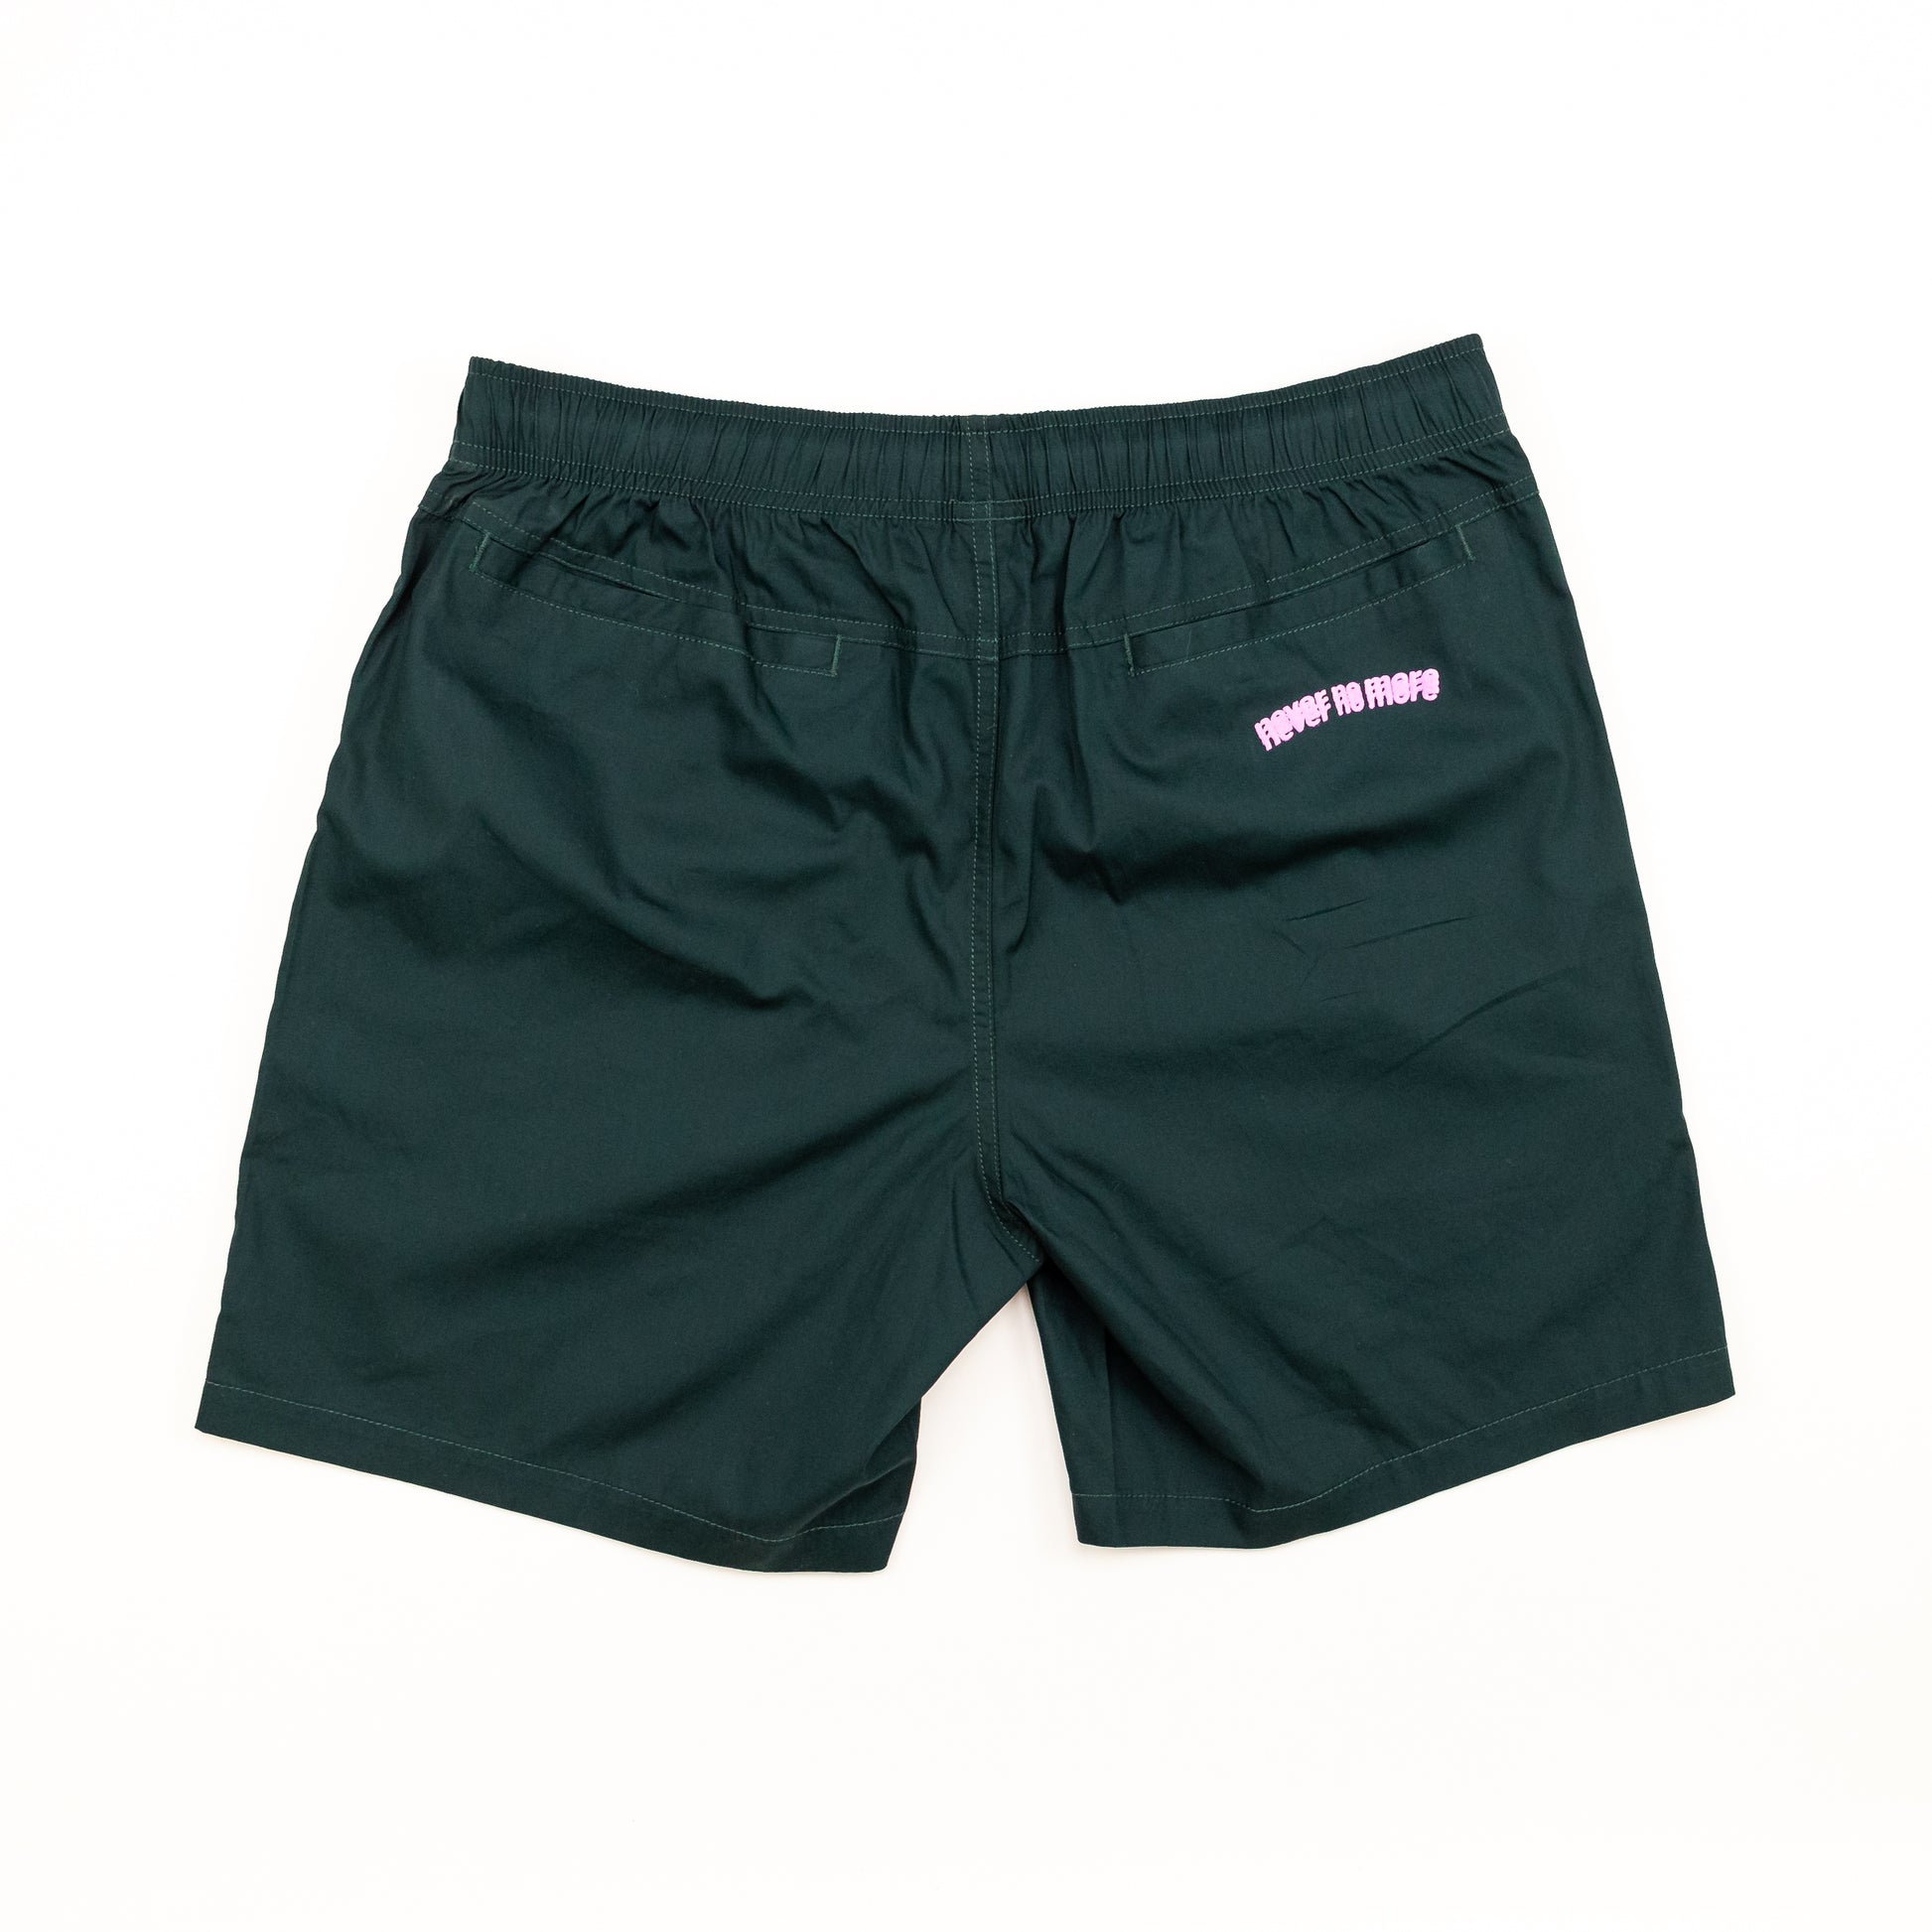 New Lo Surf Short, Pine Green - Layr Official